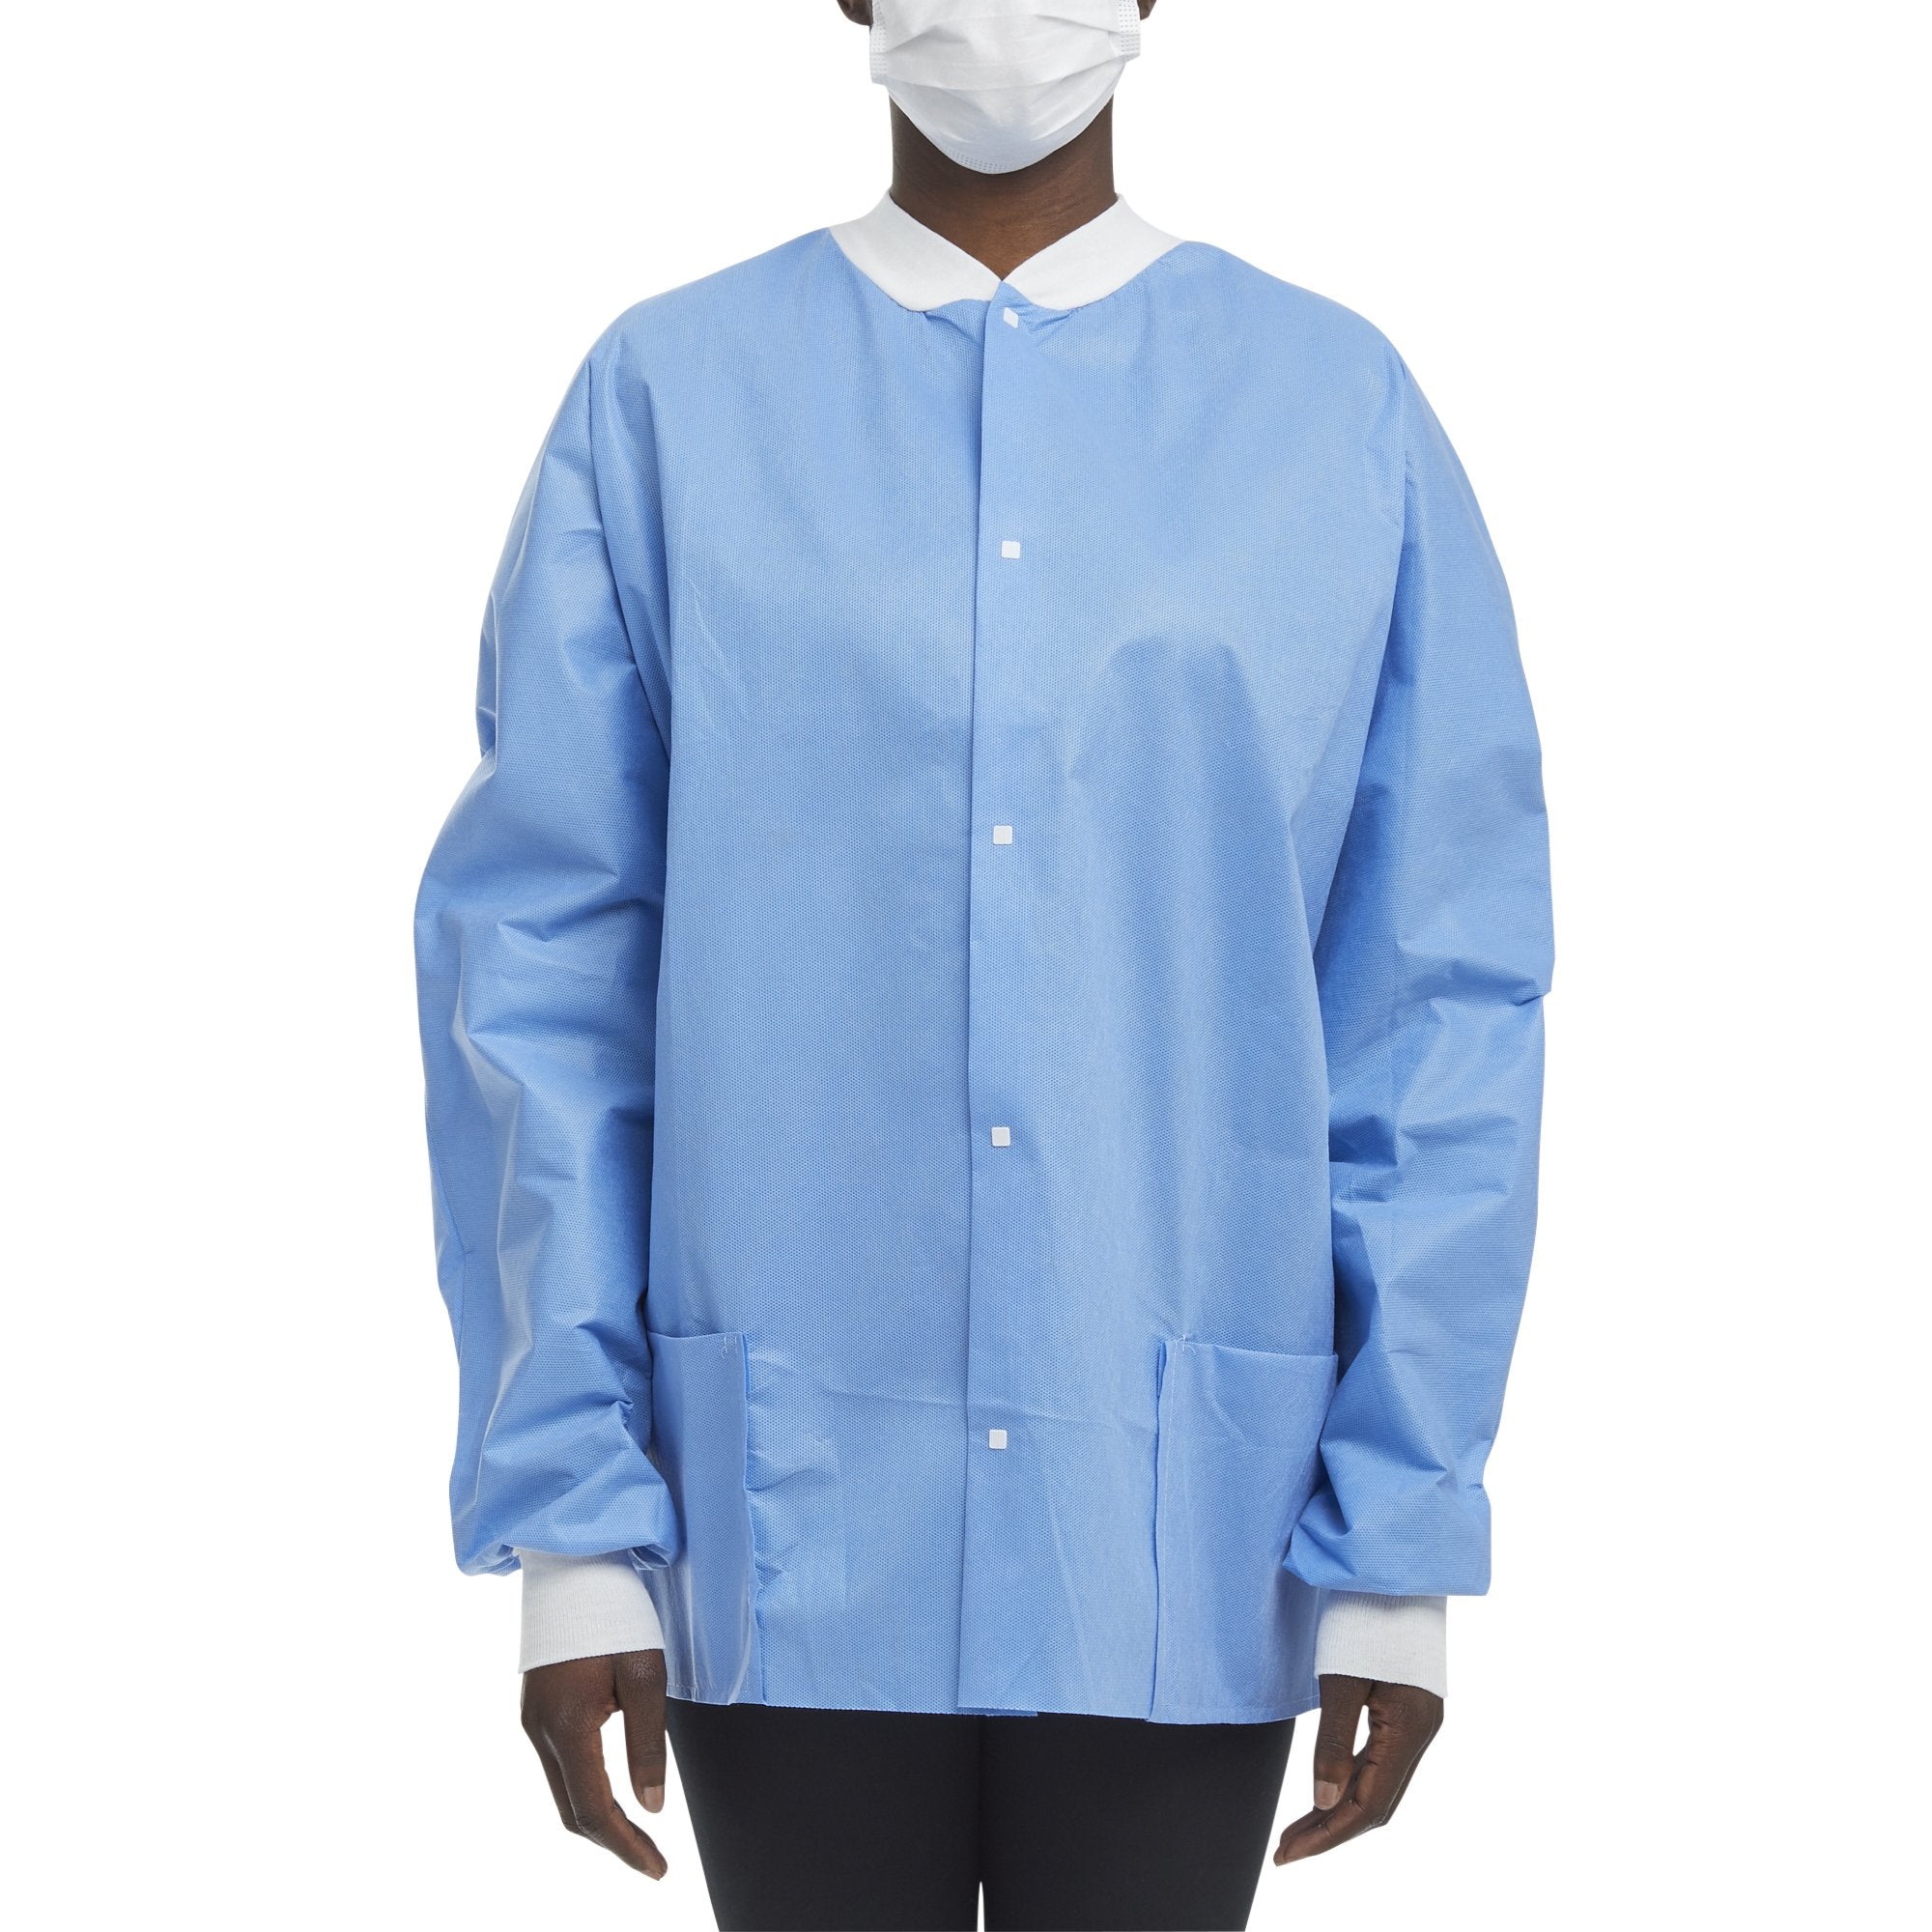 Lab Jacket Blue Large Hip Length 3-Layer SMS Disposable